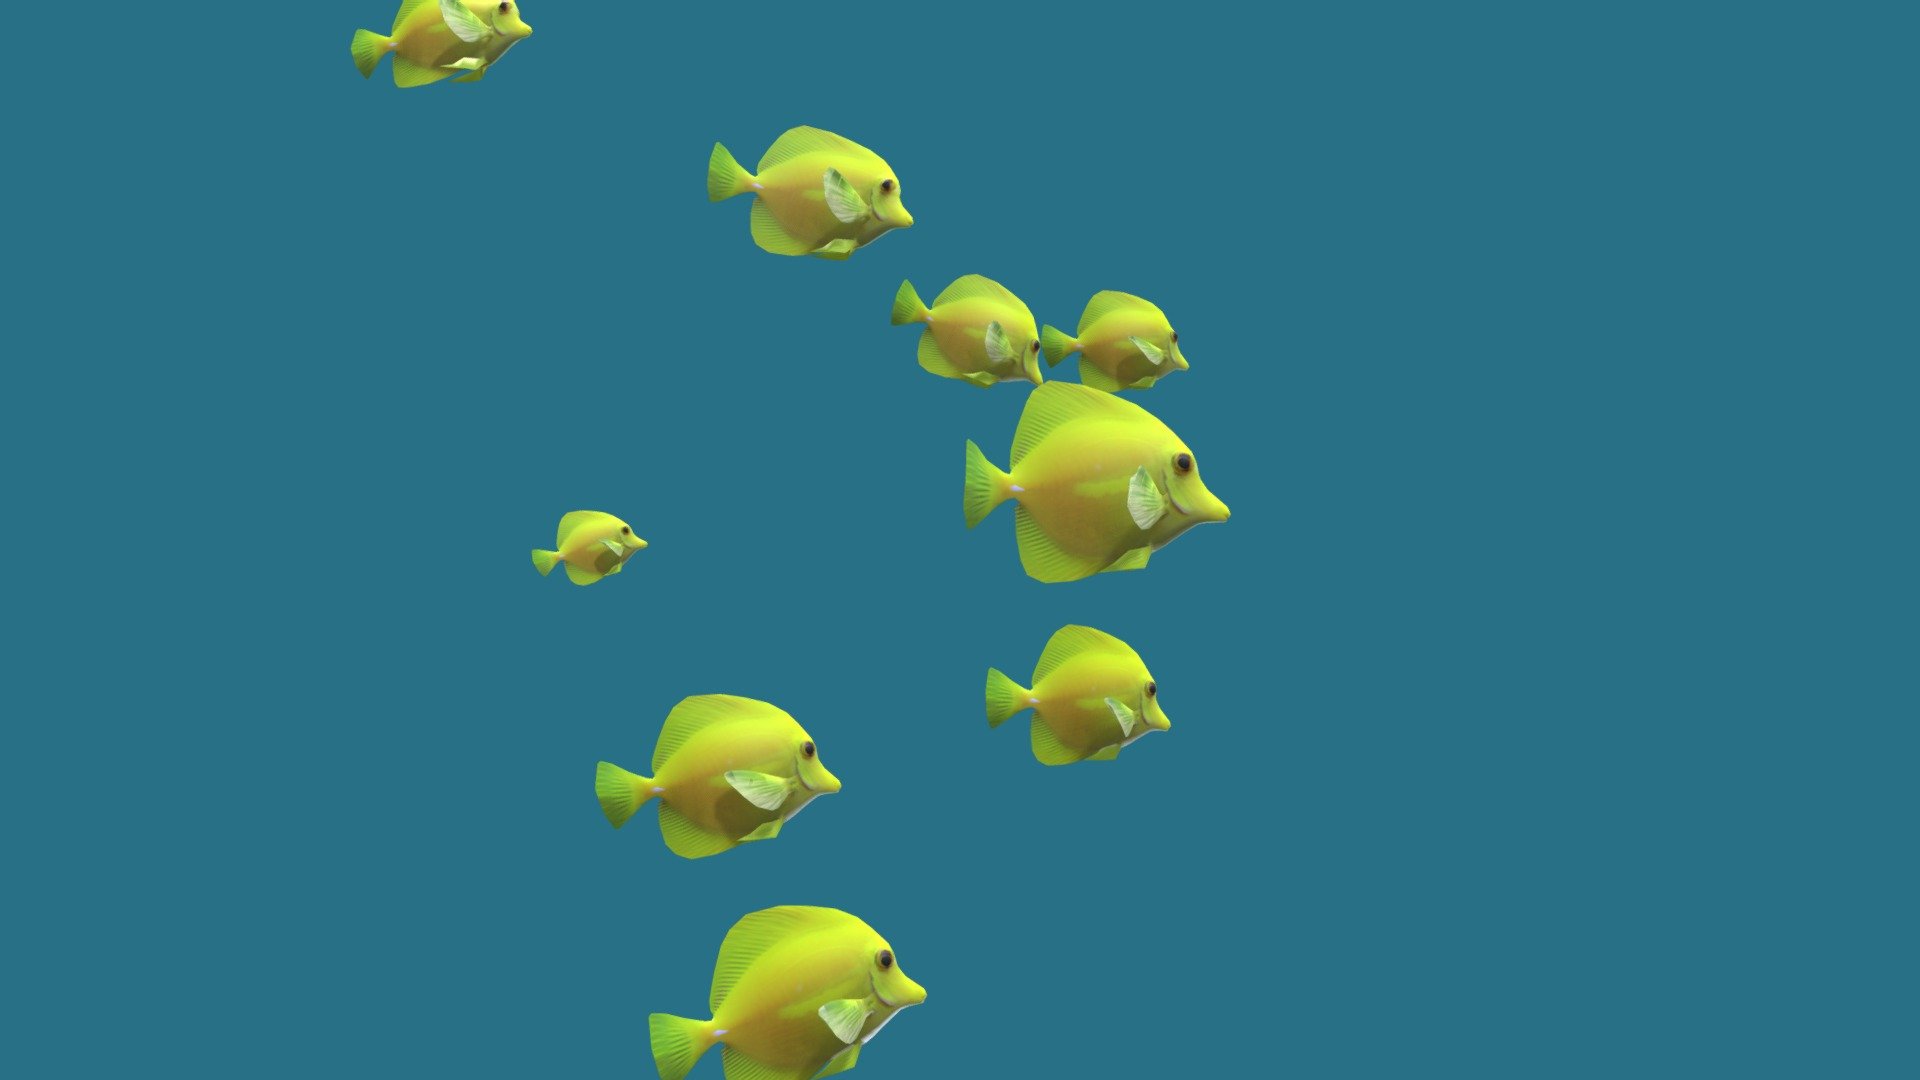 Before purchasing this model, you can free download Emperor Angelfish and try to import it. 



Schooling Yellow Tangs



10 fish

Loop 30sec. 



Blue and Yellow fish: https://skfb.ly/6UUZo



Only Blue fish: https://skfb.ly/6UUYX



Dear Blender Users If you have any problems importing into a Blender, please email me, this problem is solved. To contact me use the link in the top right corner of my main Sketchfab page (LinkedIn or Behance) 3d model